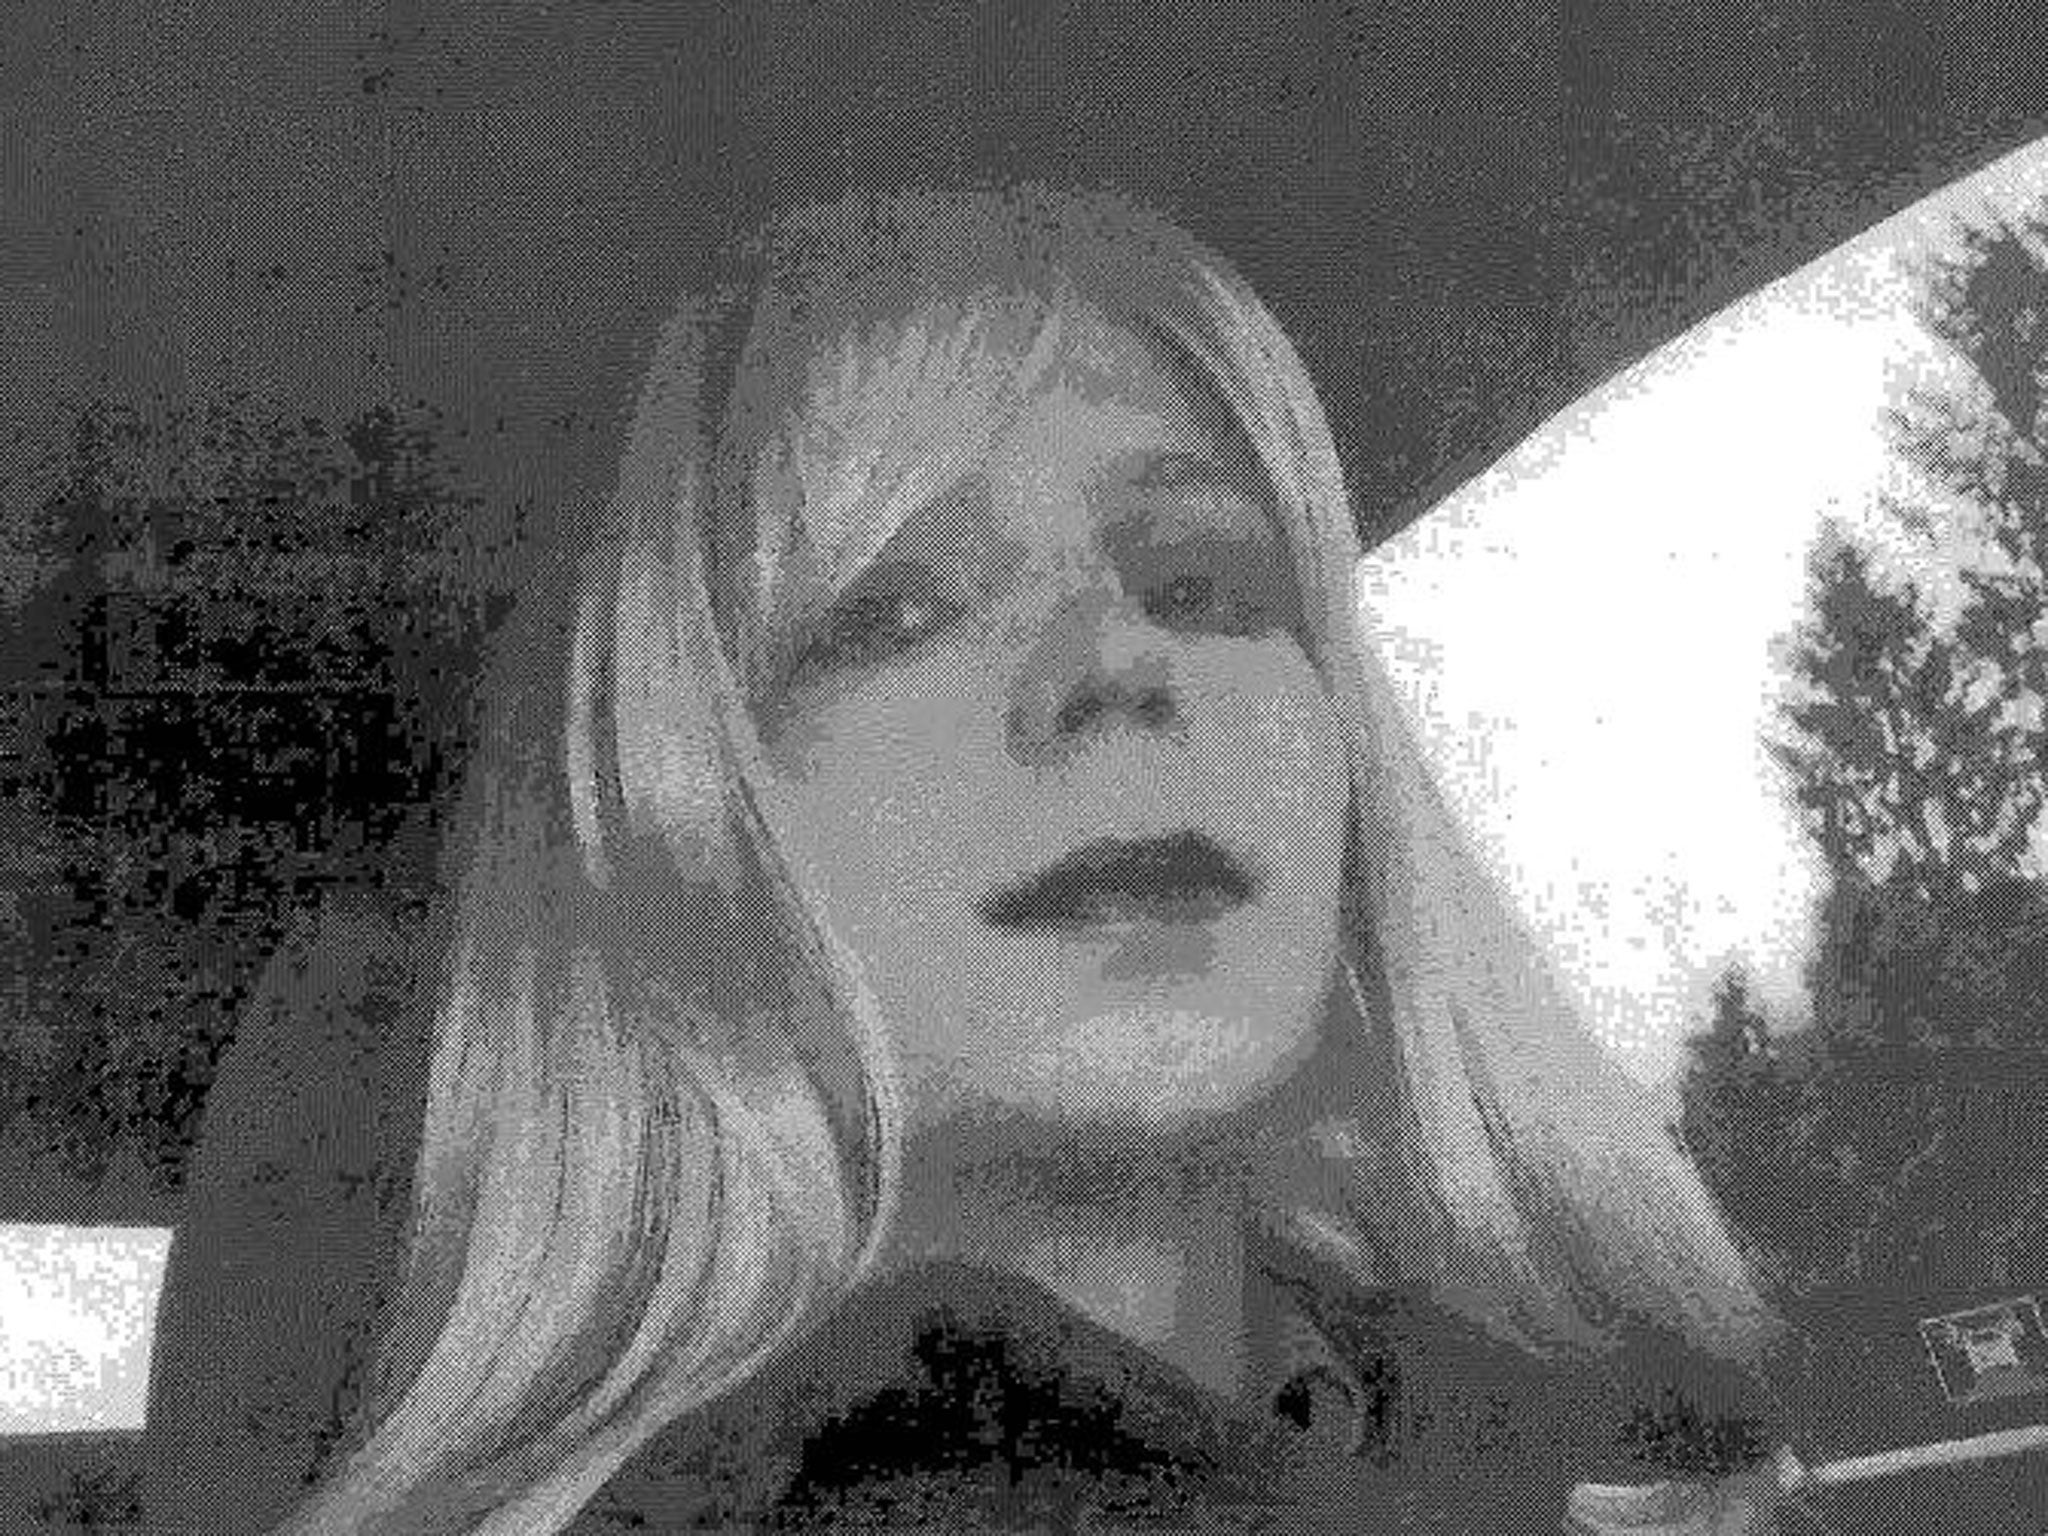 The Welsh family of jailed WikiLeaks source Chelsea Manning have received donations from an ex-convict